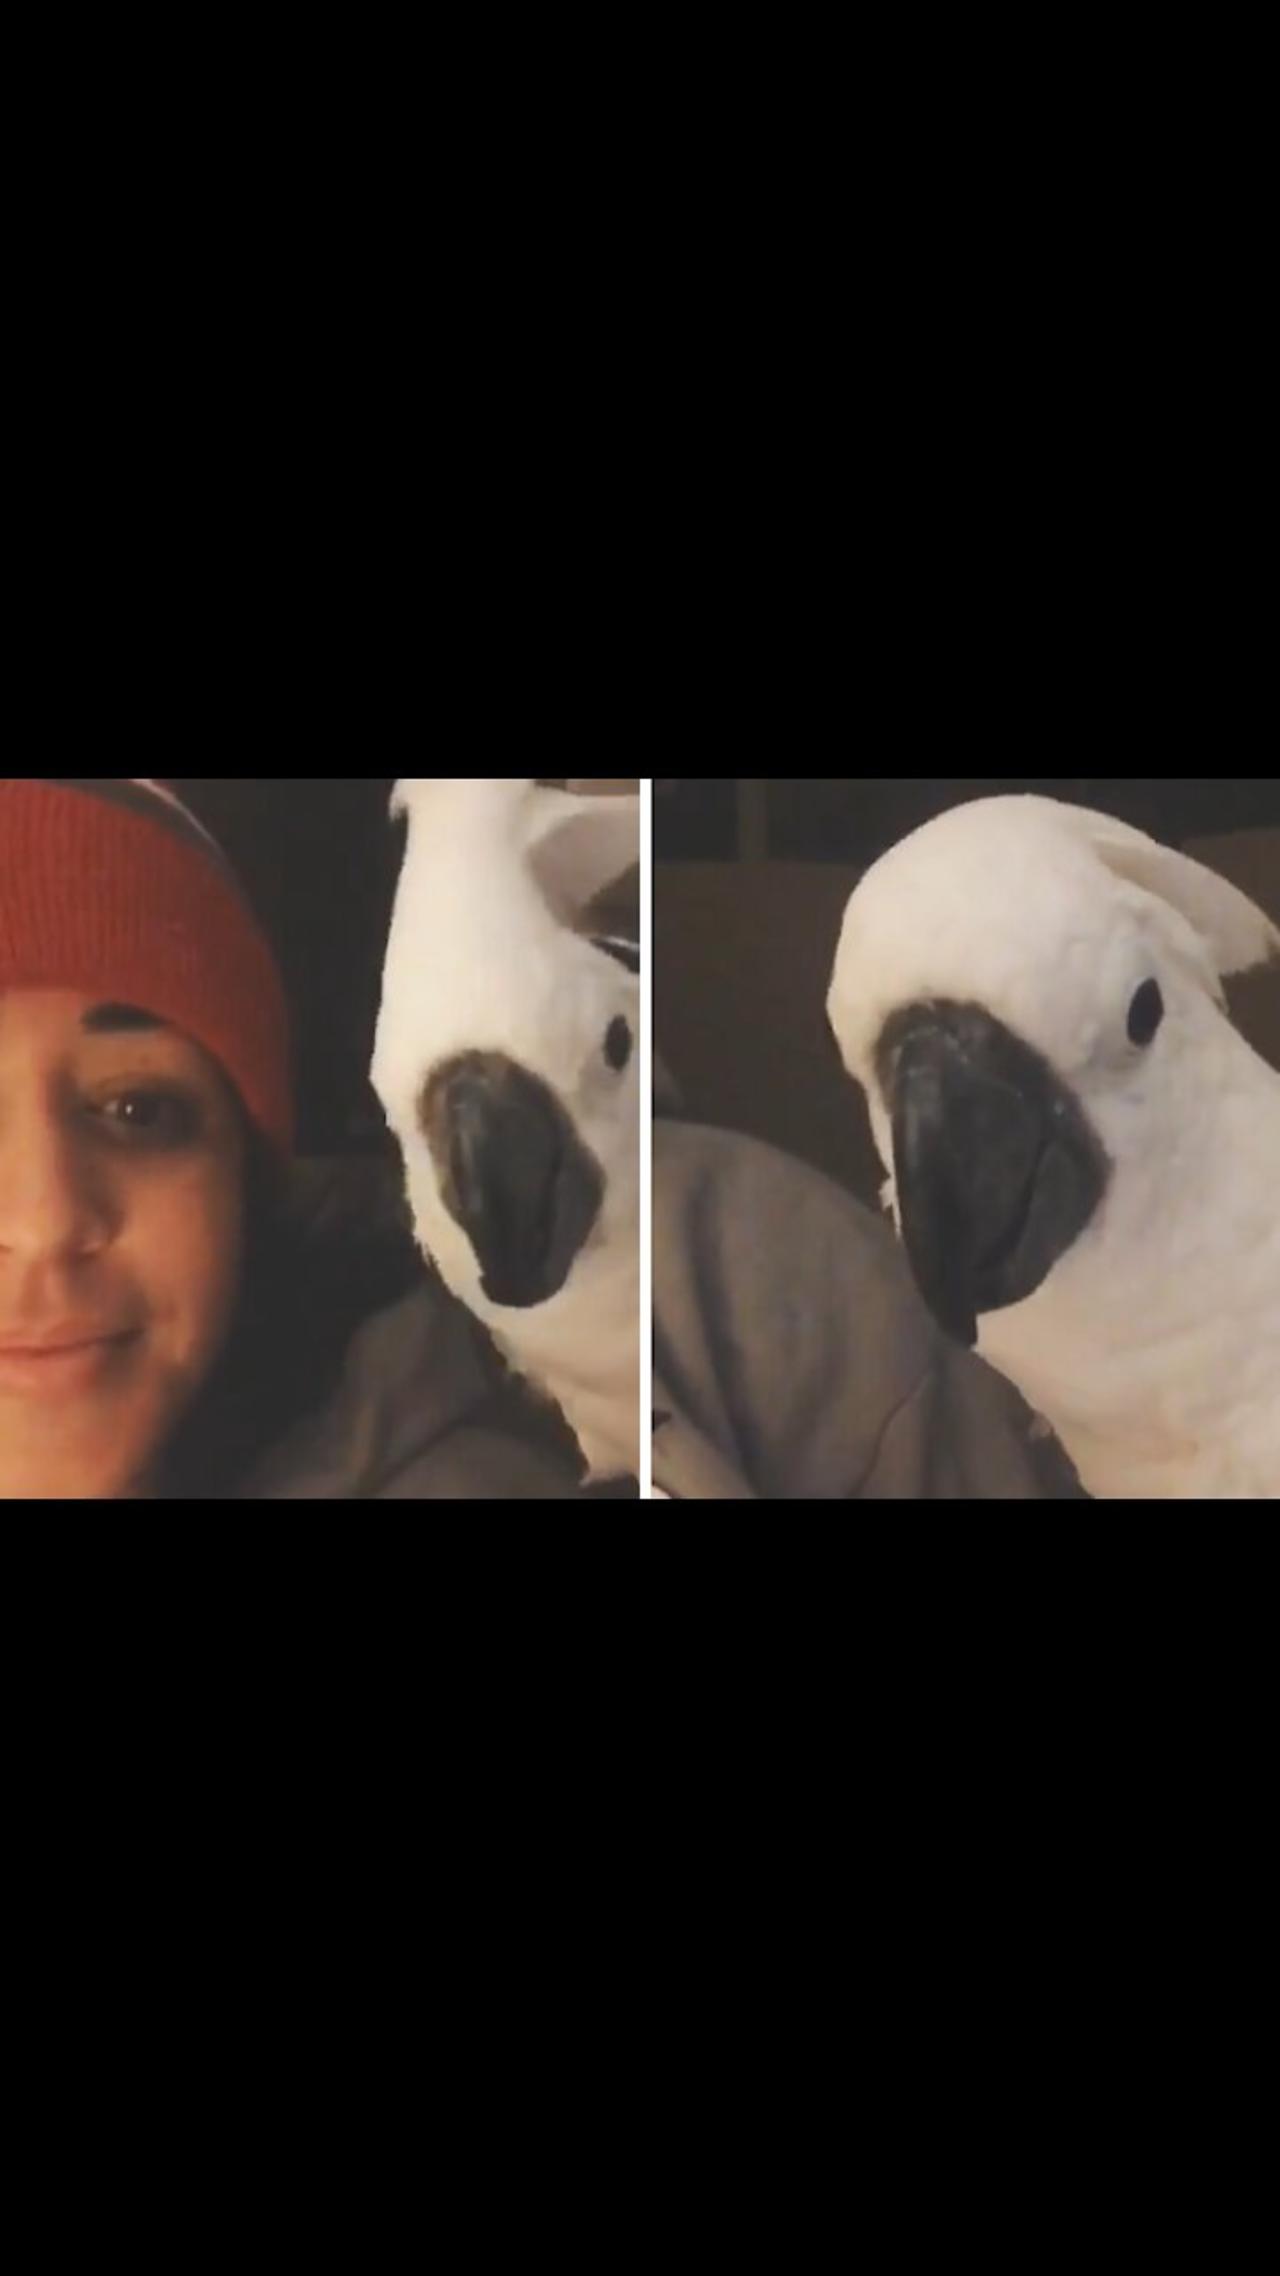 Parrot has nothing but nice things to say to his owner